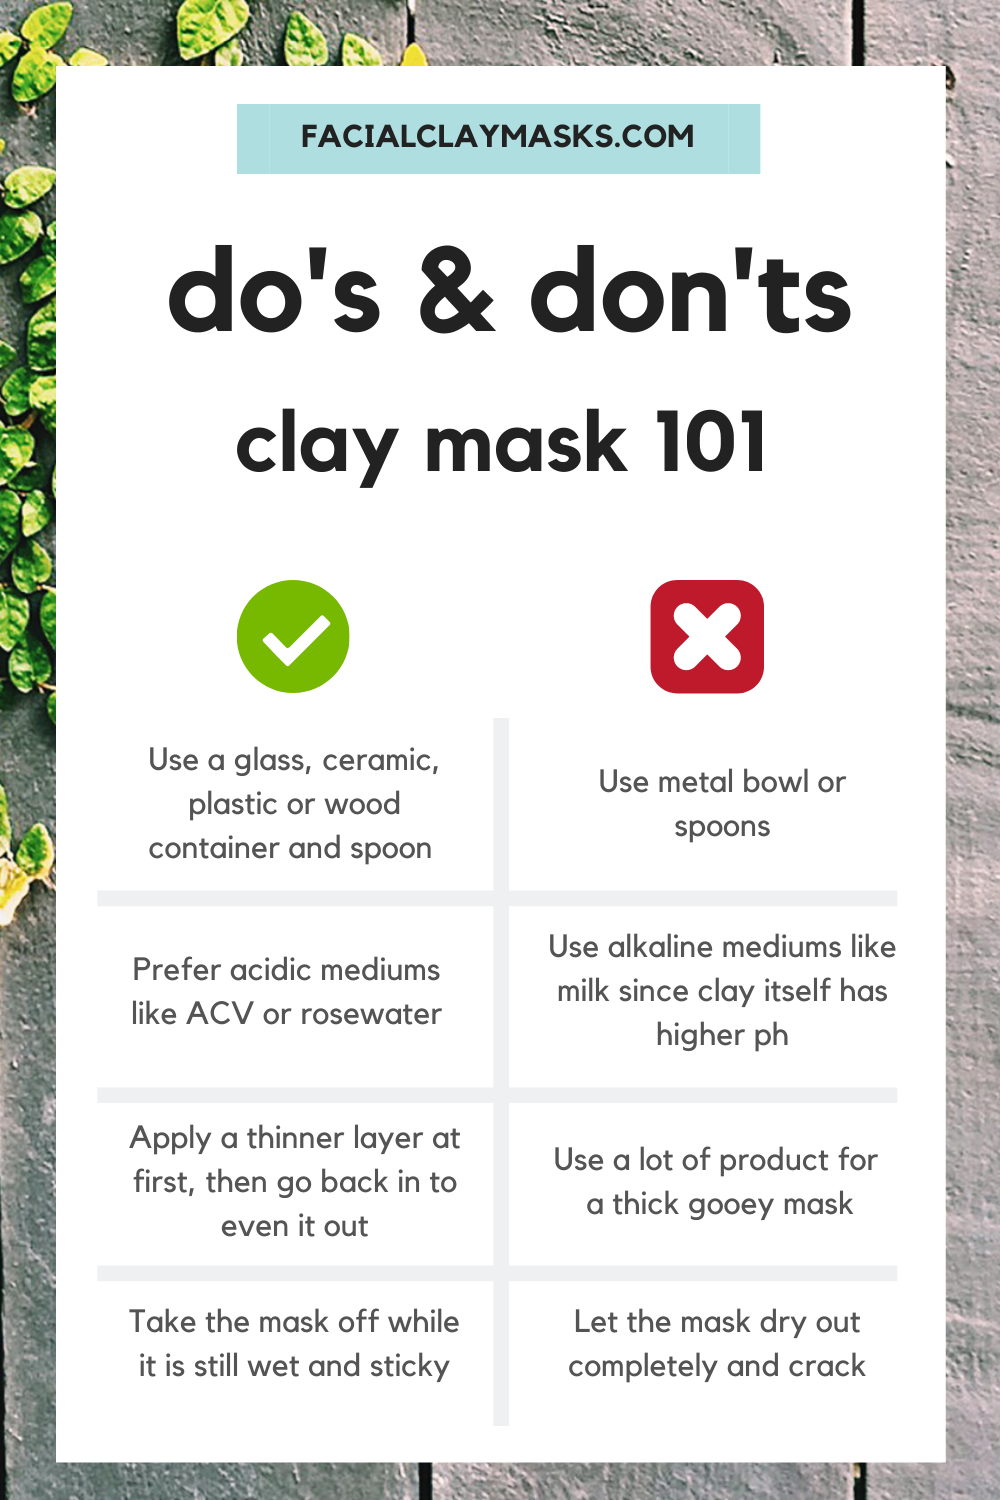 How to Apply Face Mask 3